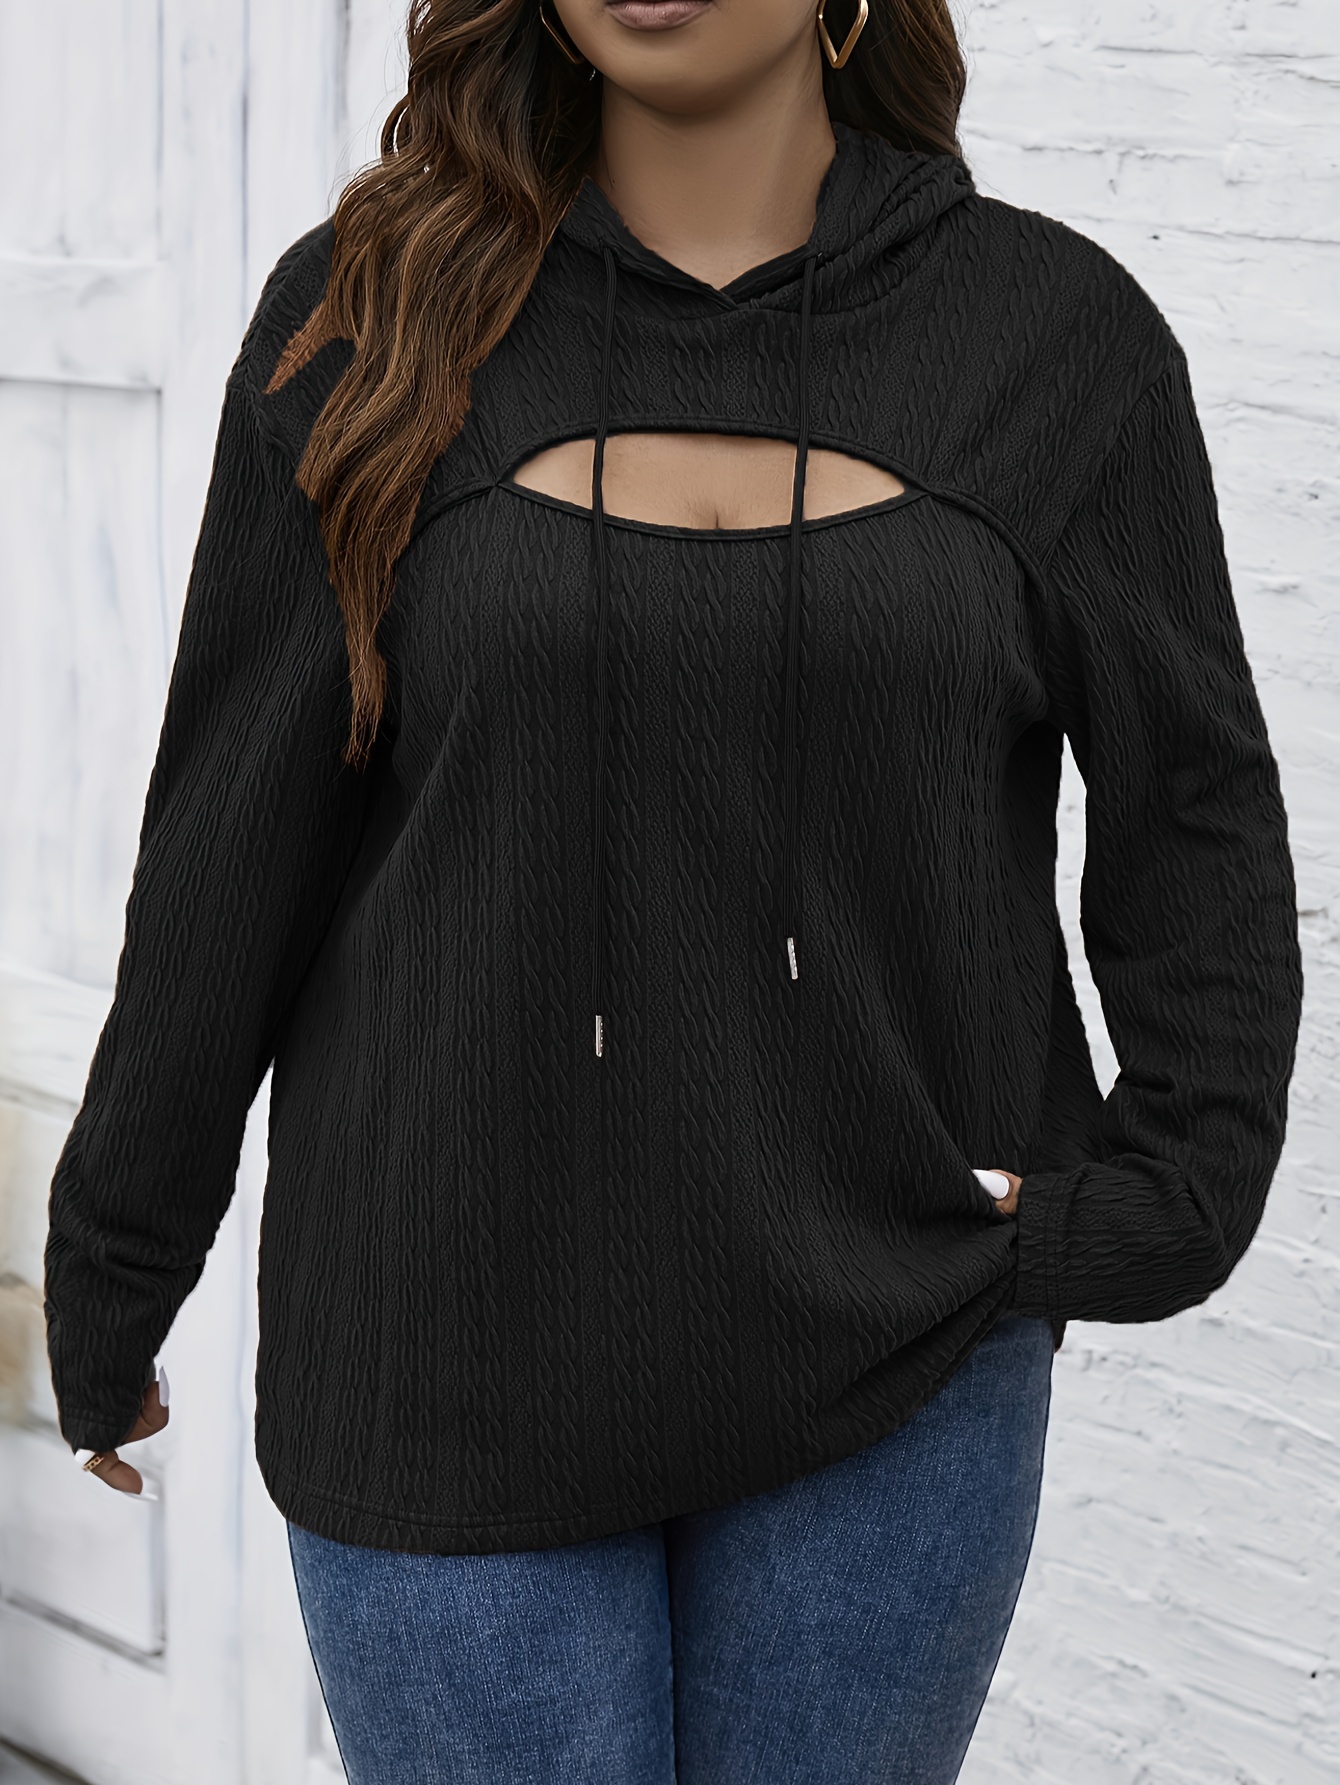 Plus Size Spring Autumn Women Pullovers Hoodies Medium Long Faux Two Piece  O Neck Loose Thin Top Sweatshirts Casual Black 210803 From 13,1 €